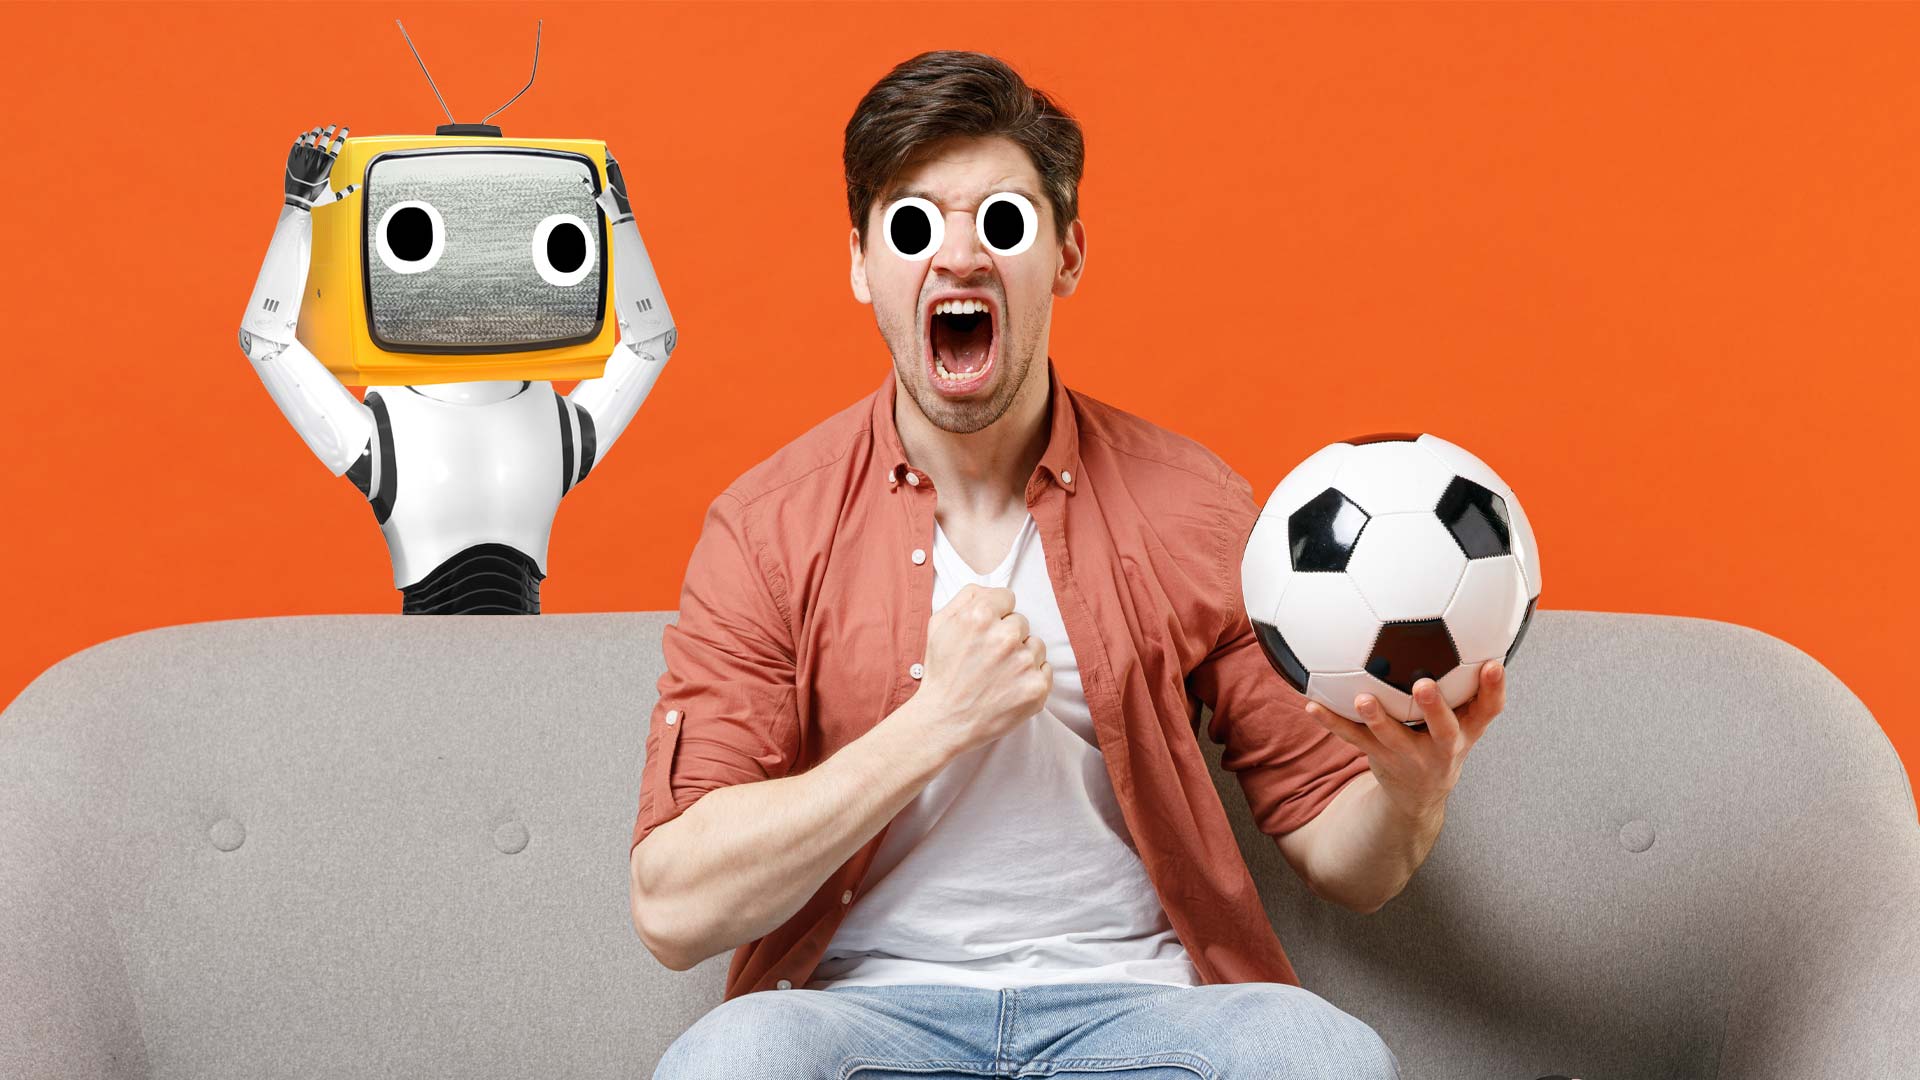 A football fan singing on a sofa, with a robot in the background